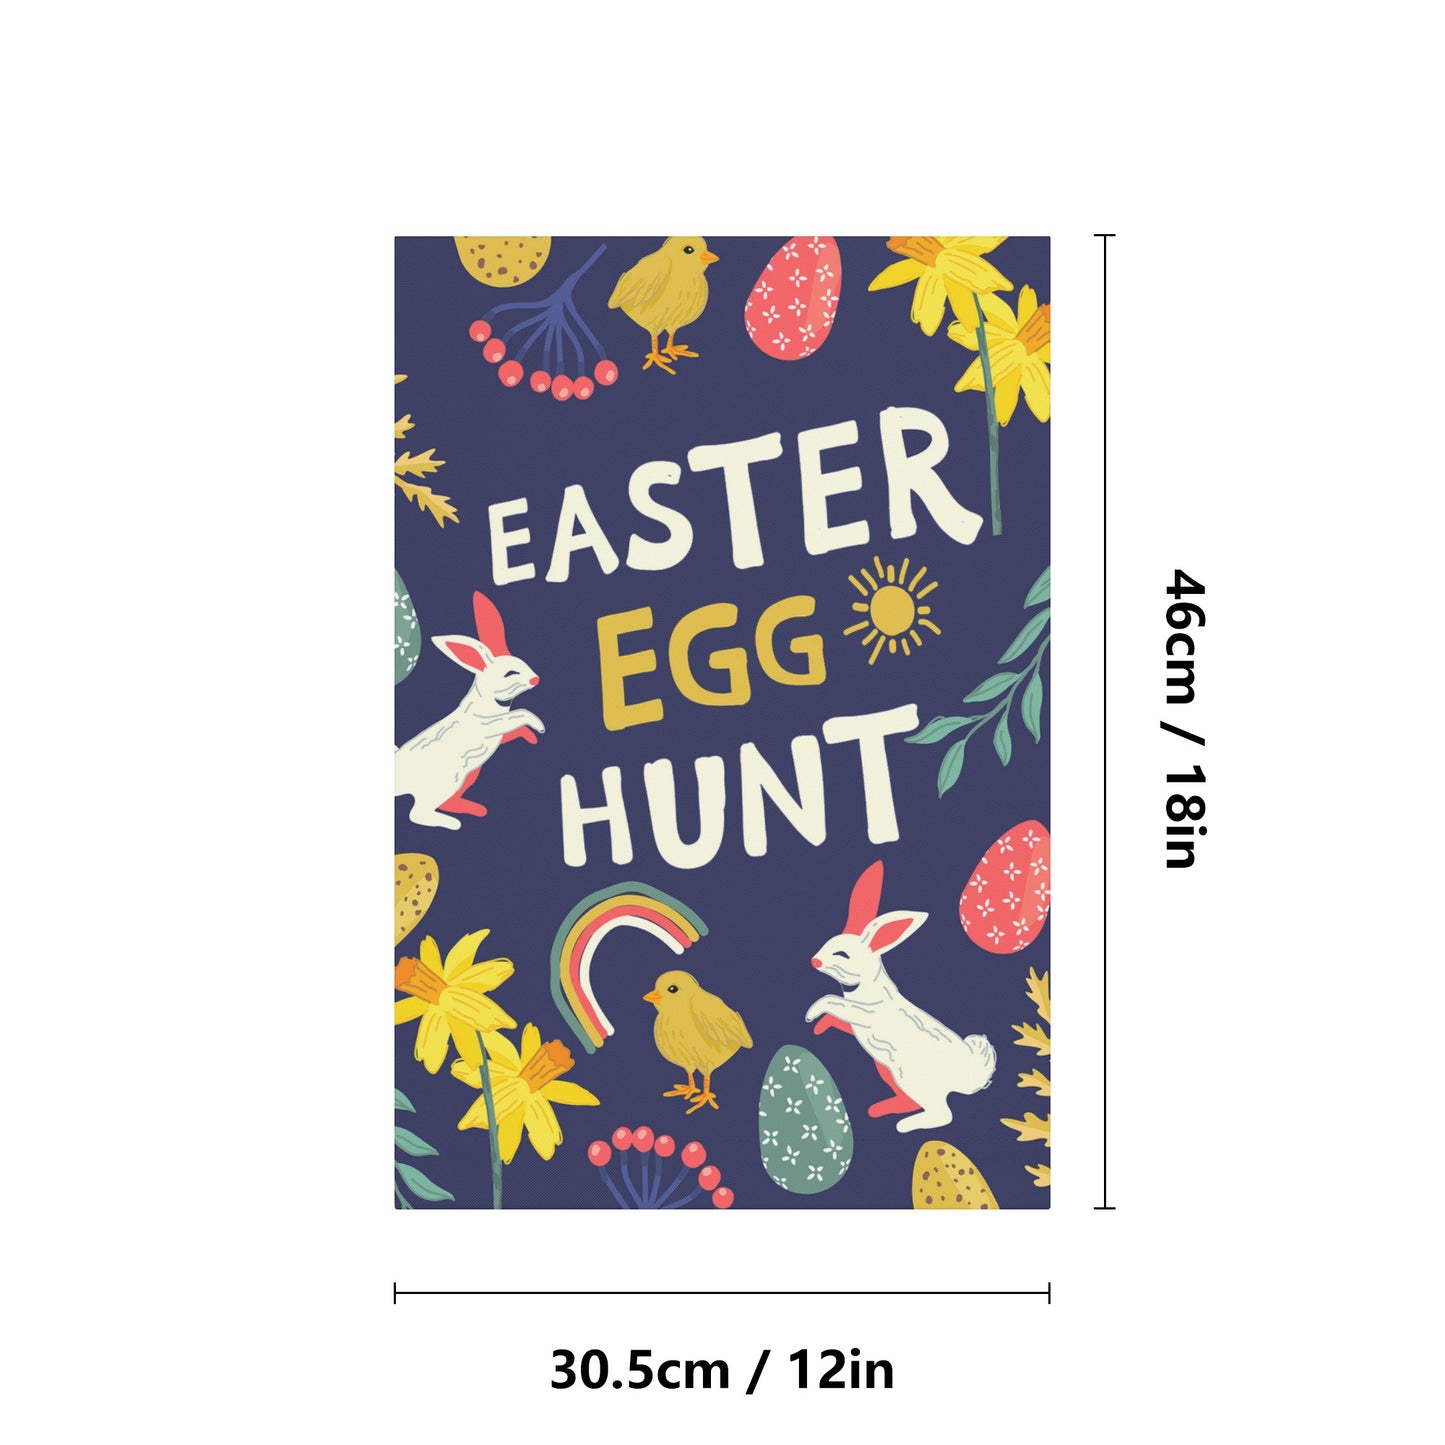 Easter Egg Hunt on a Satin Garden Flags 12X18 In